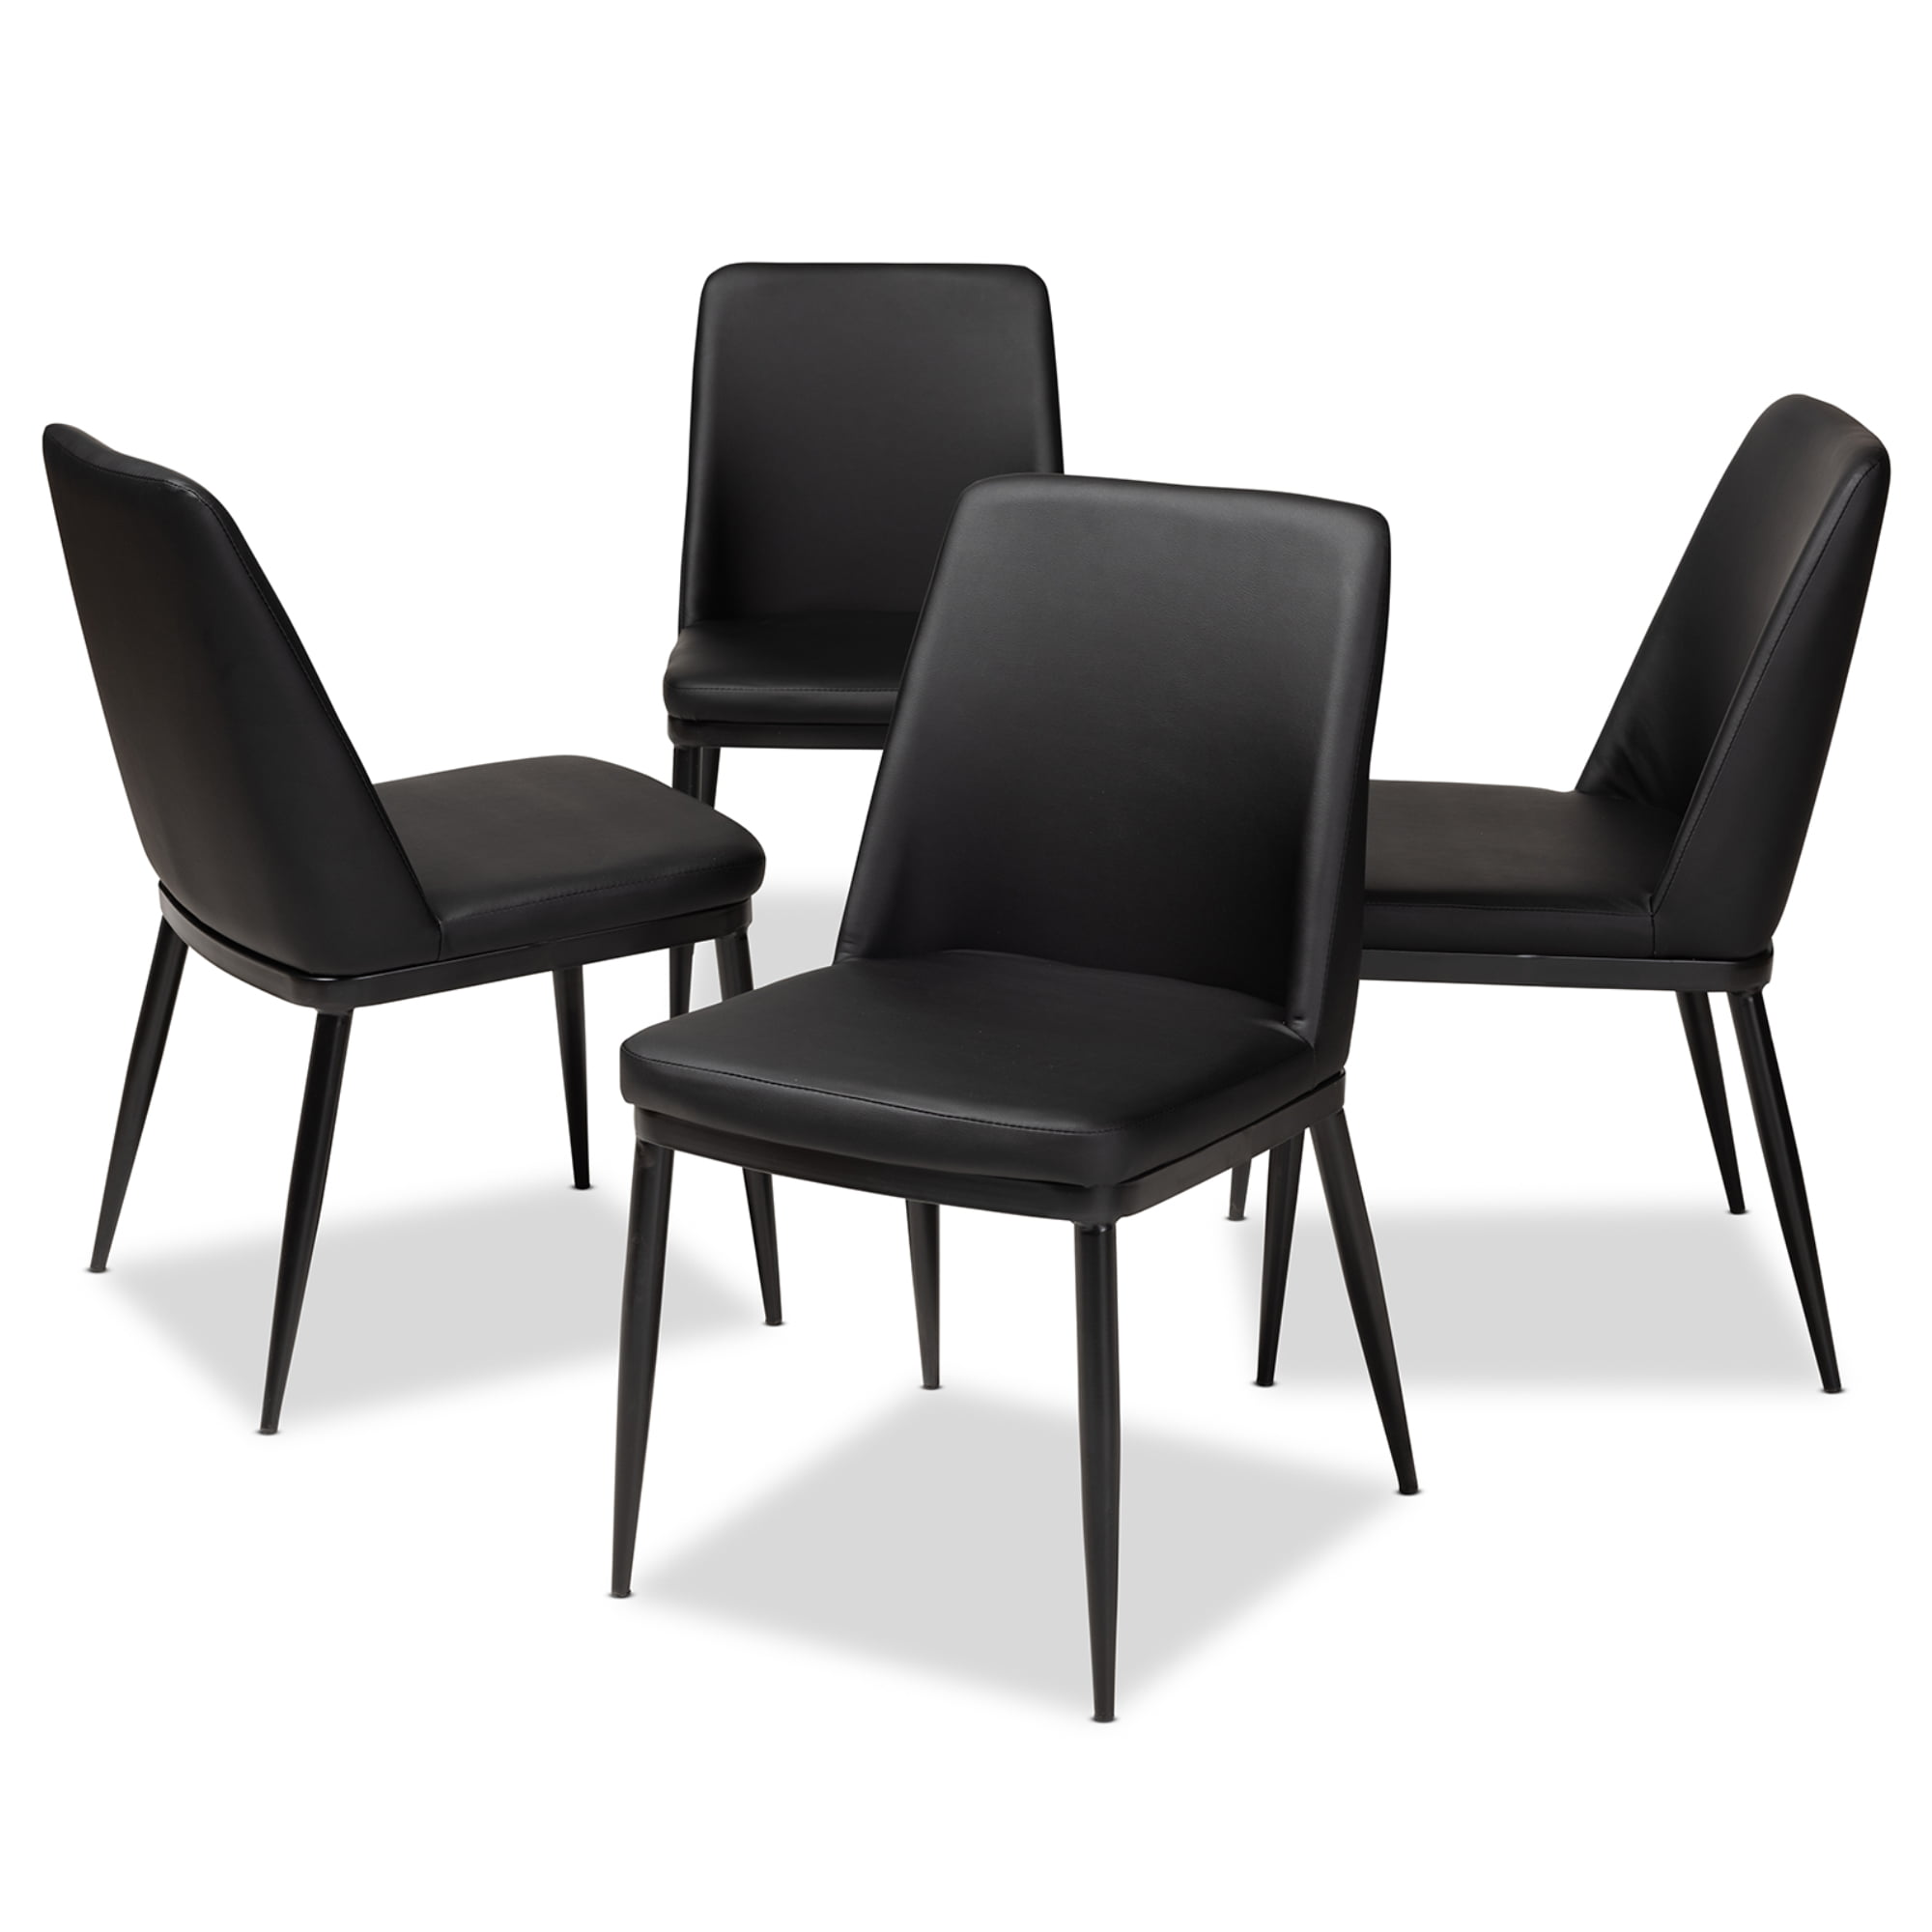 Set Of 4 Baxton Studio Darcell Modern, Modern Black Leather Dining Chairs